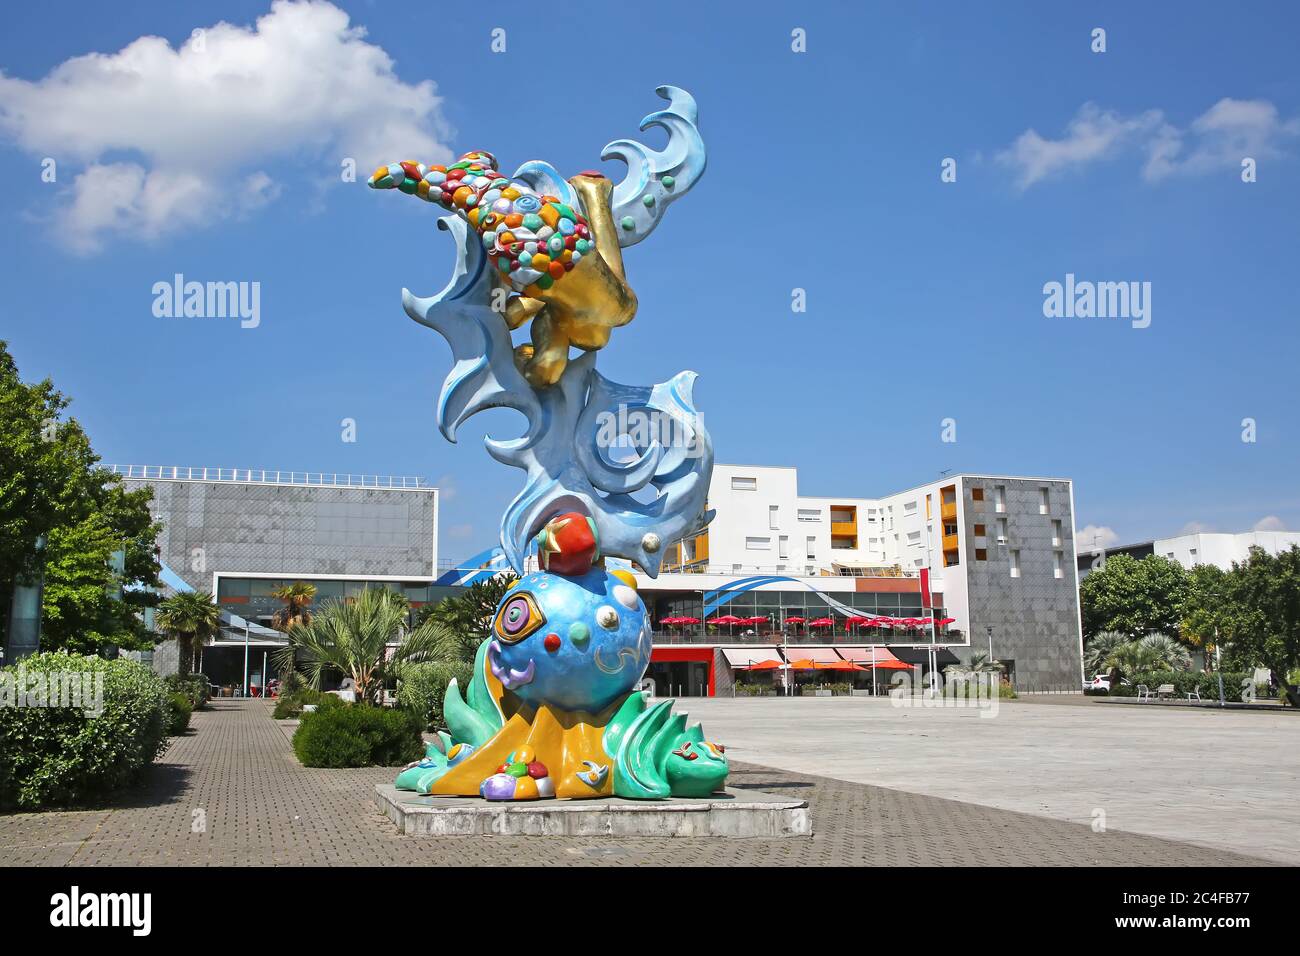 Modern buildings, shopping in the city center with a modern Art Mermaid sculpture in the foreground, Saint Nazaire, Loire Atlantique, France. Stock Photo